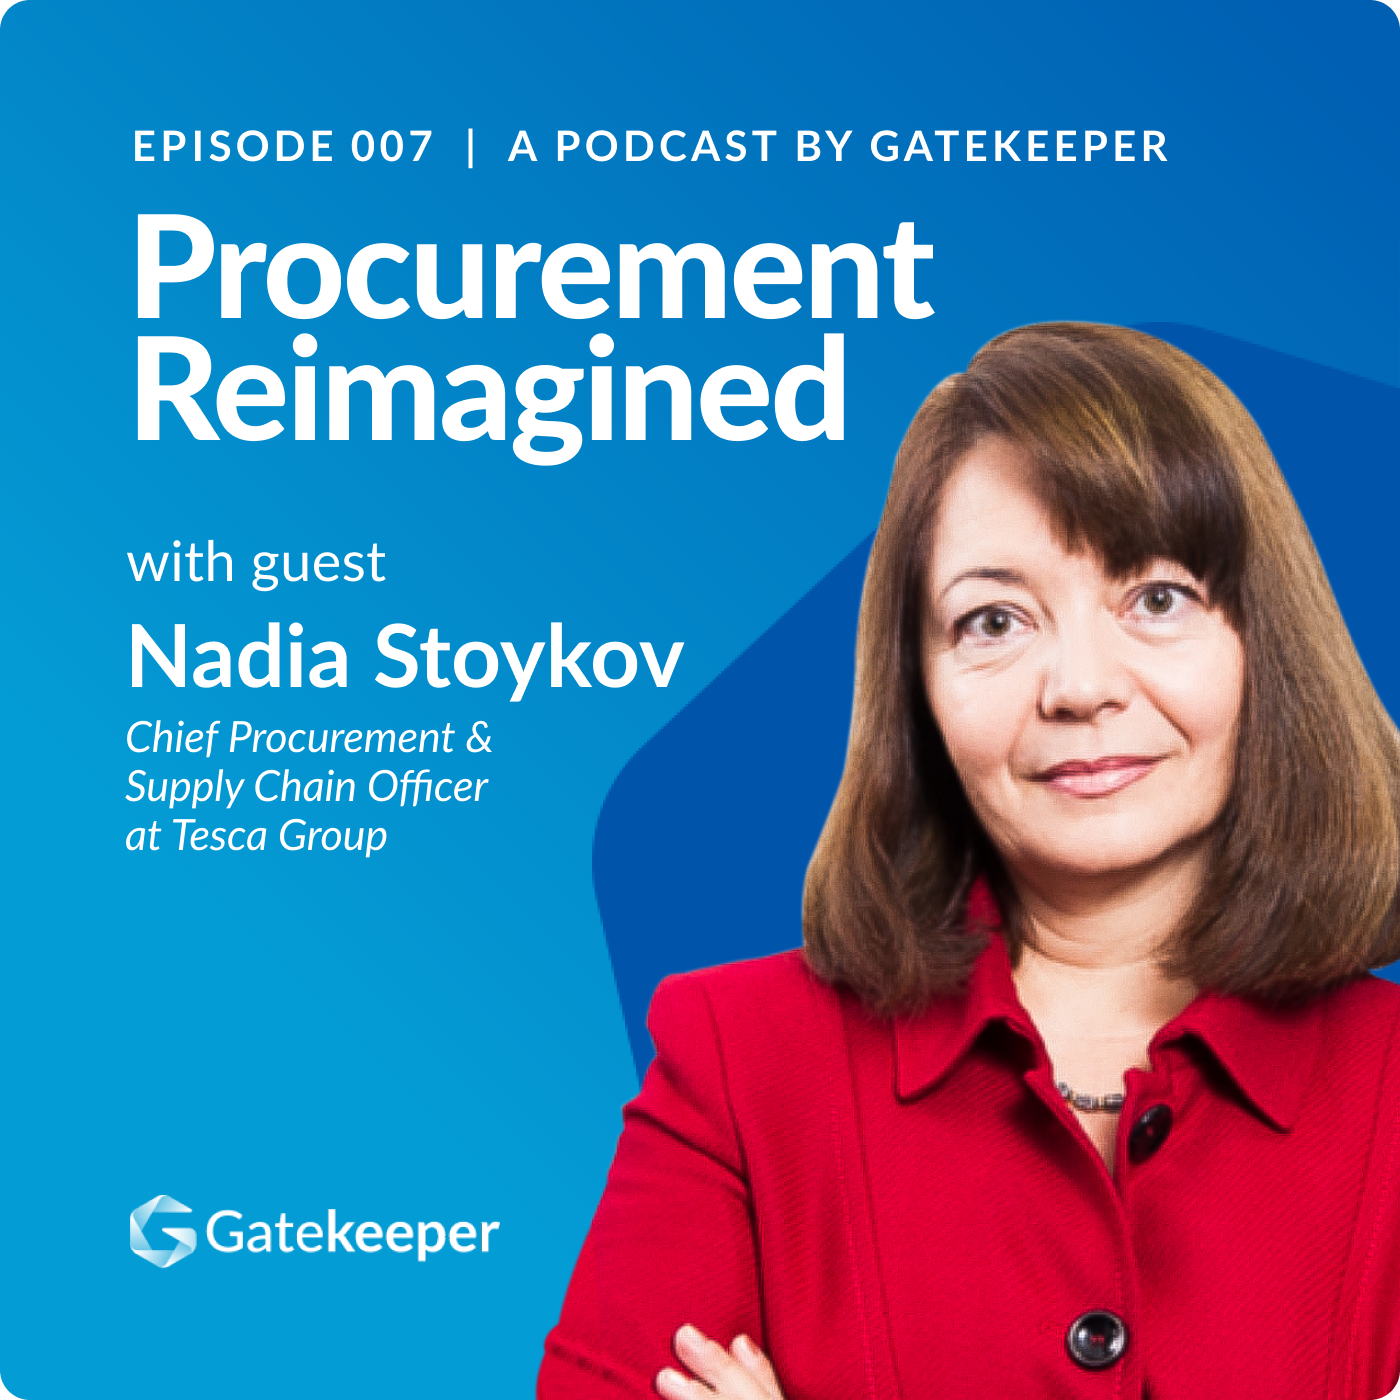 Reimagining Procurement the Way it Should Be with Nadia Stoykov - Featured Image